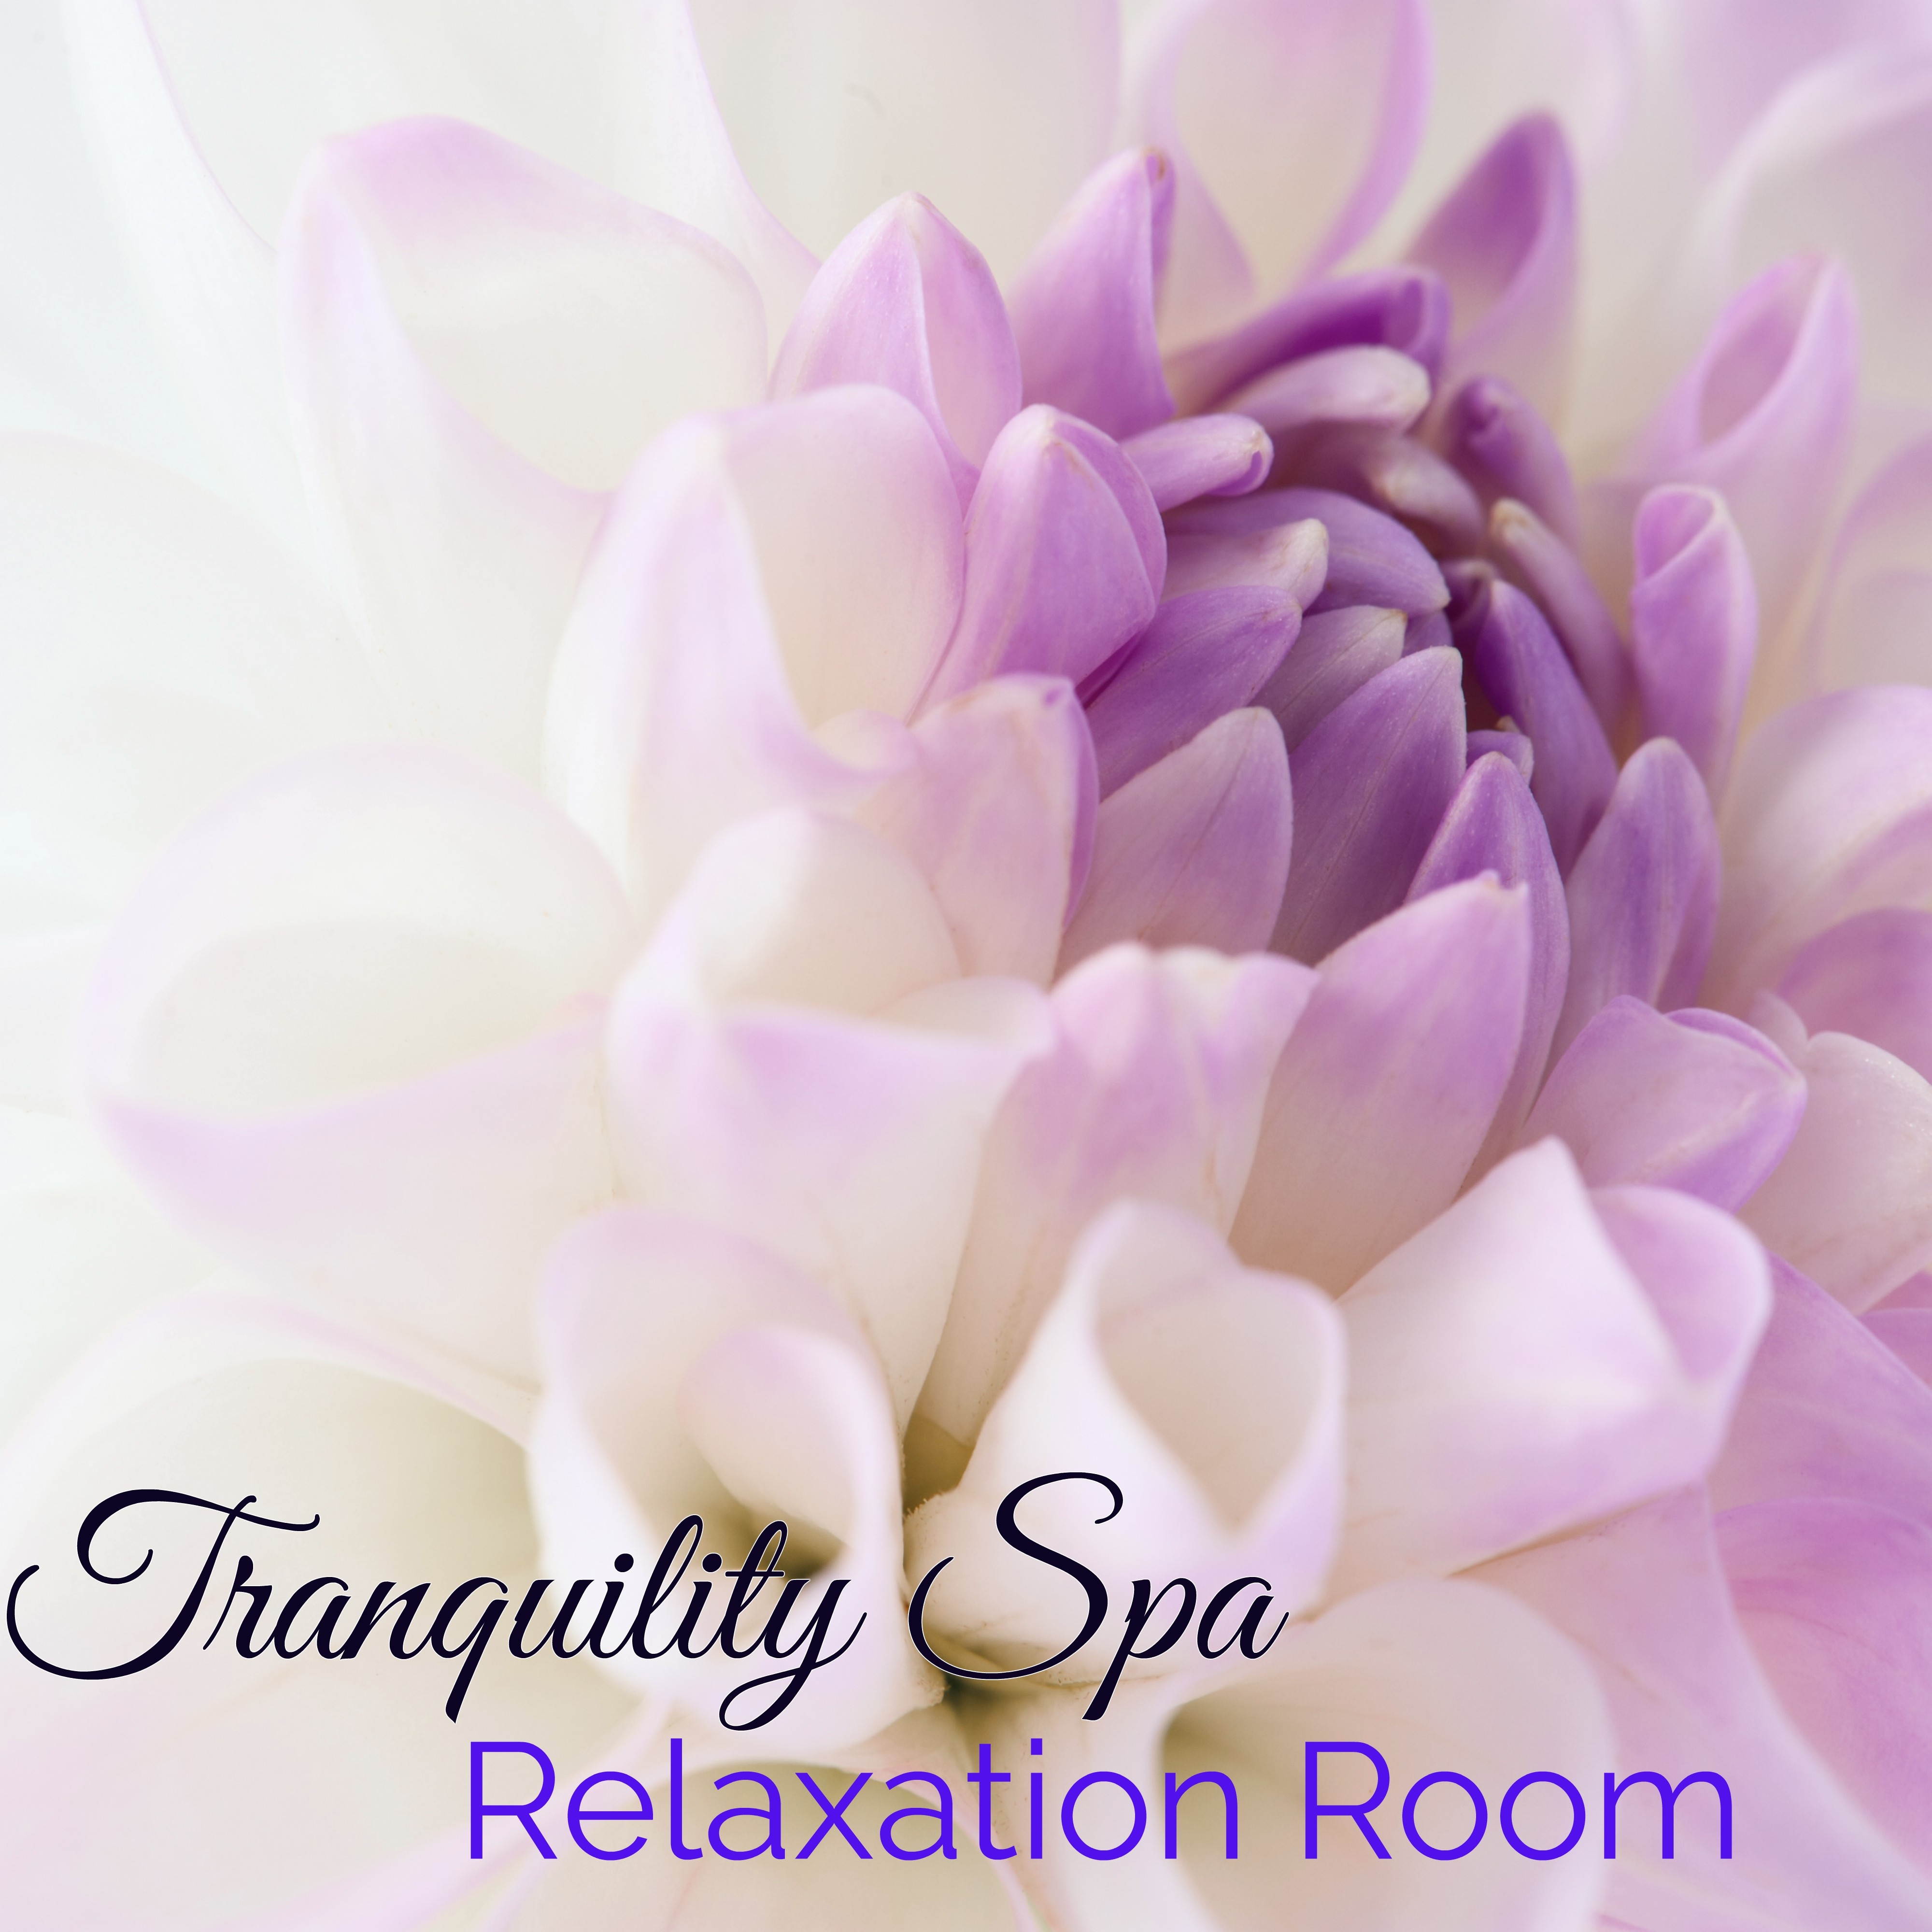 Tranquility Spa Relaxation Room – Calming and Soothing Music for Massage, Deep Relaxation, Autogenic Training and Shiatsu